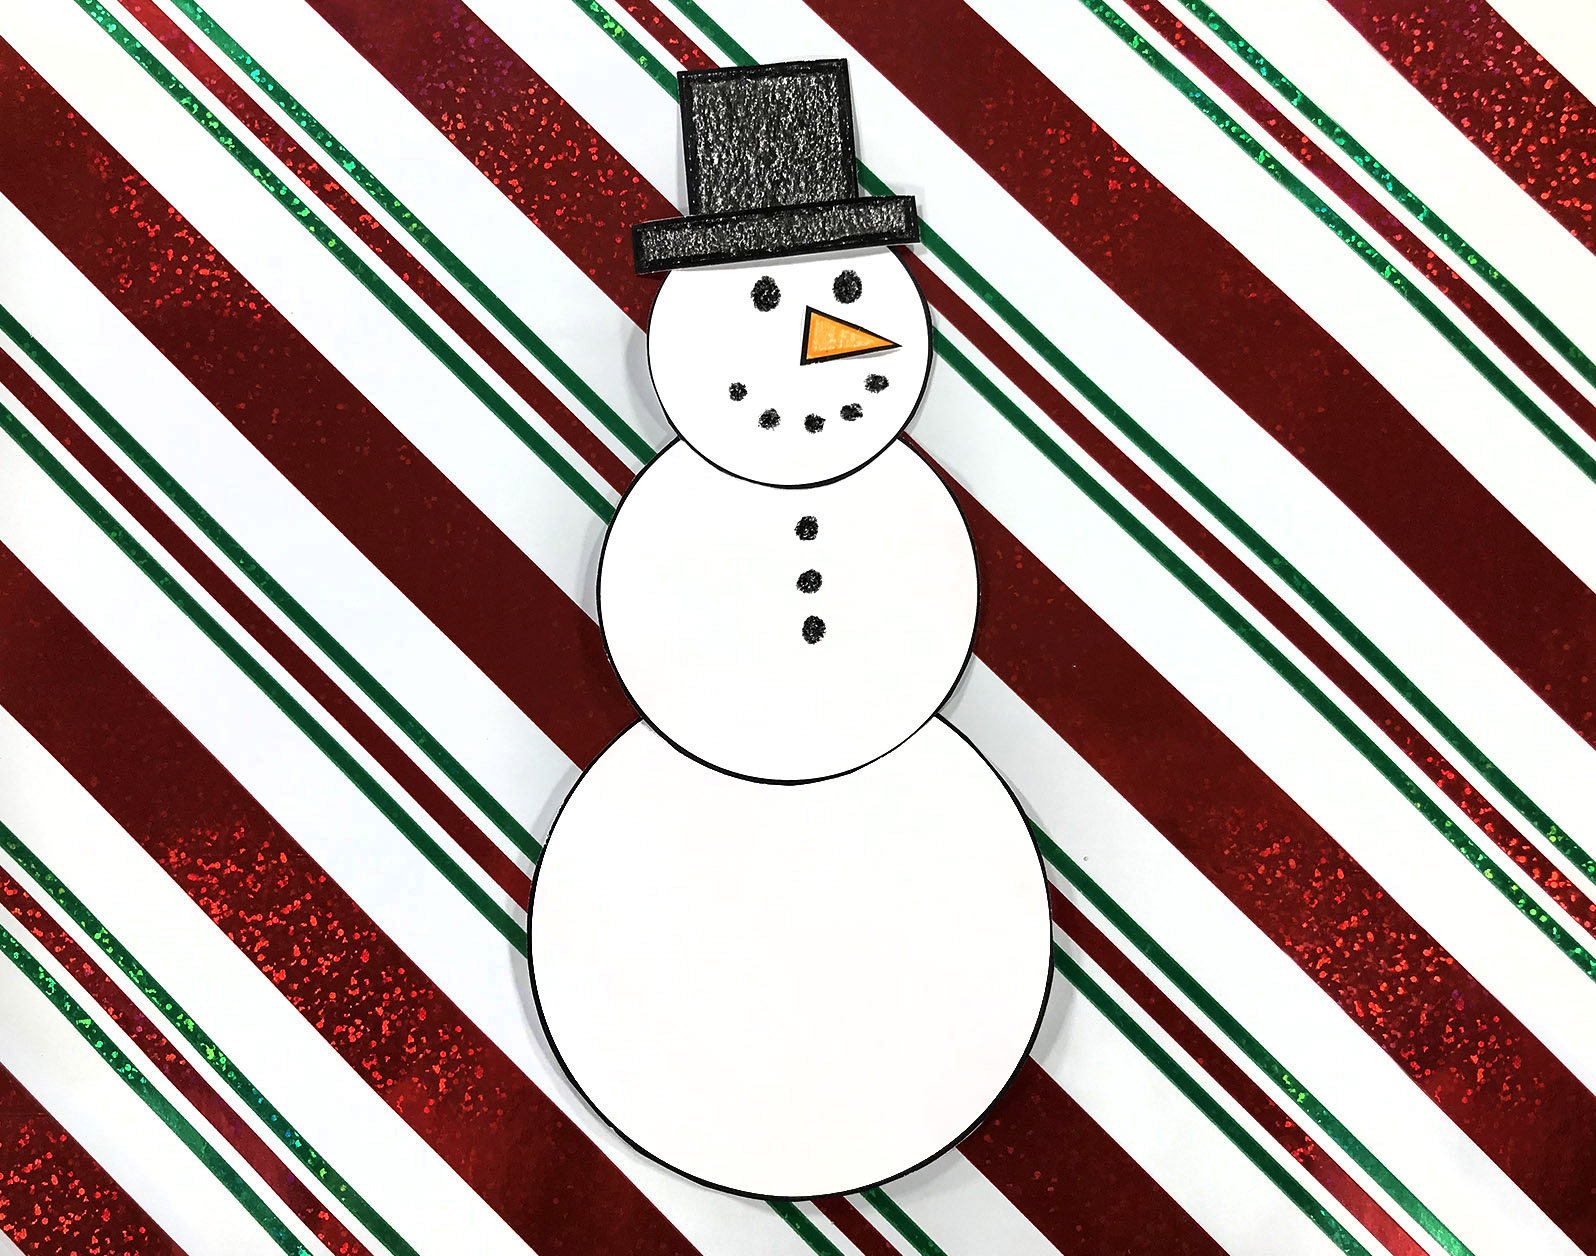 Build a Snowman from 2D Shapes!